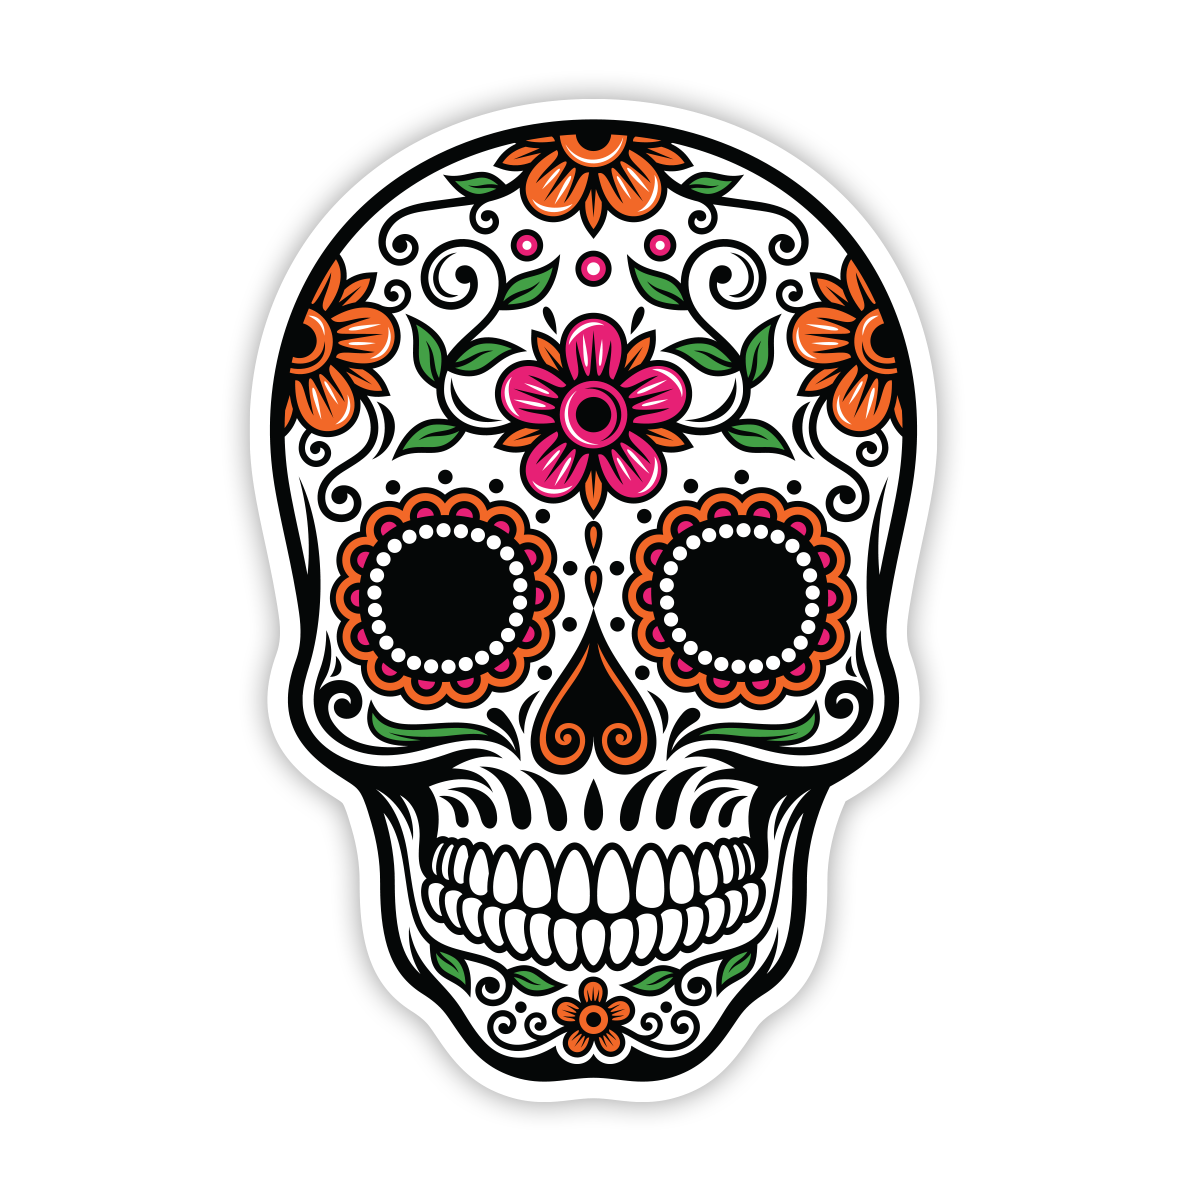 day of the dead skull clipart